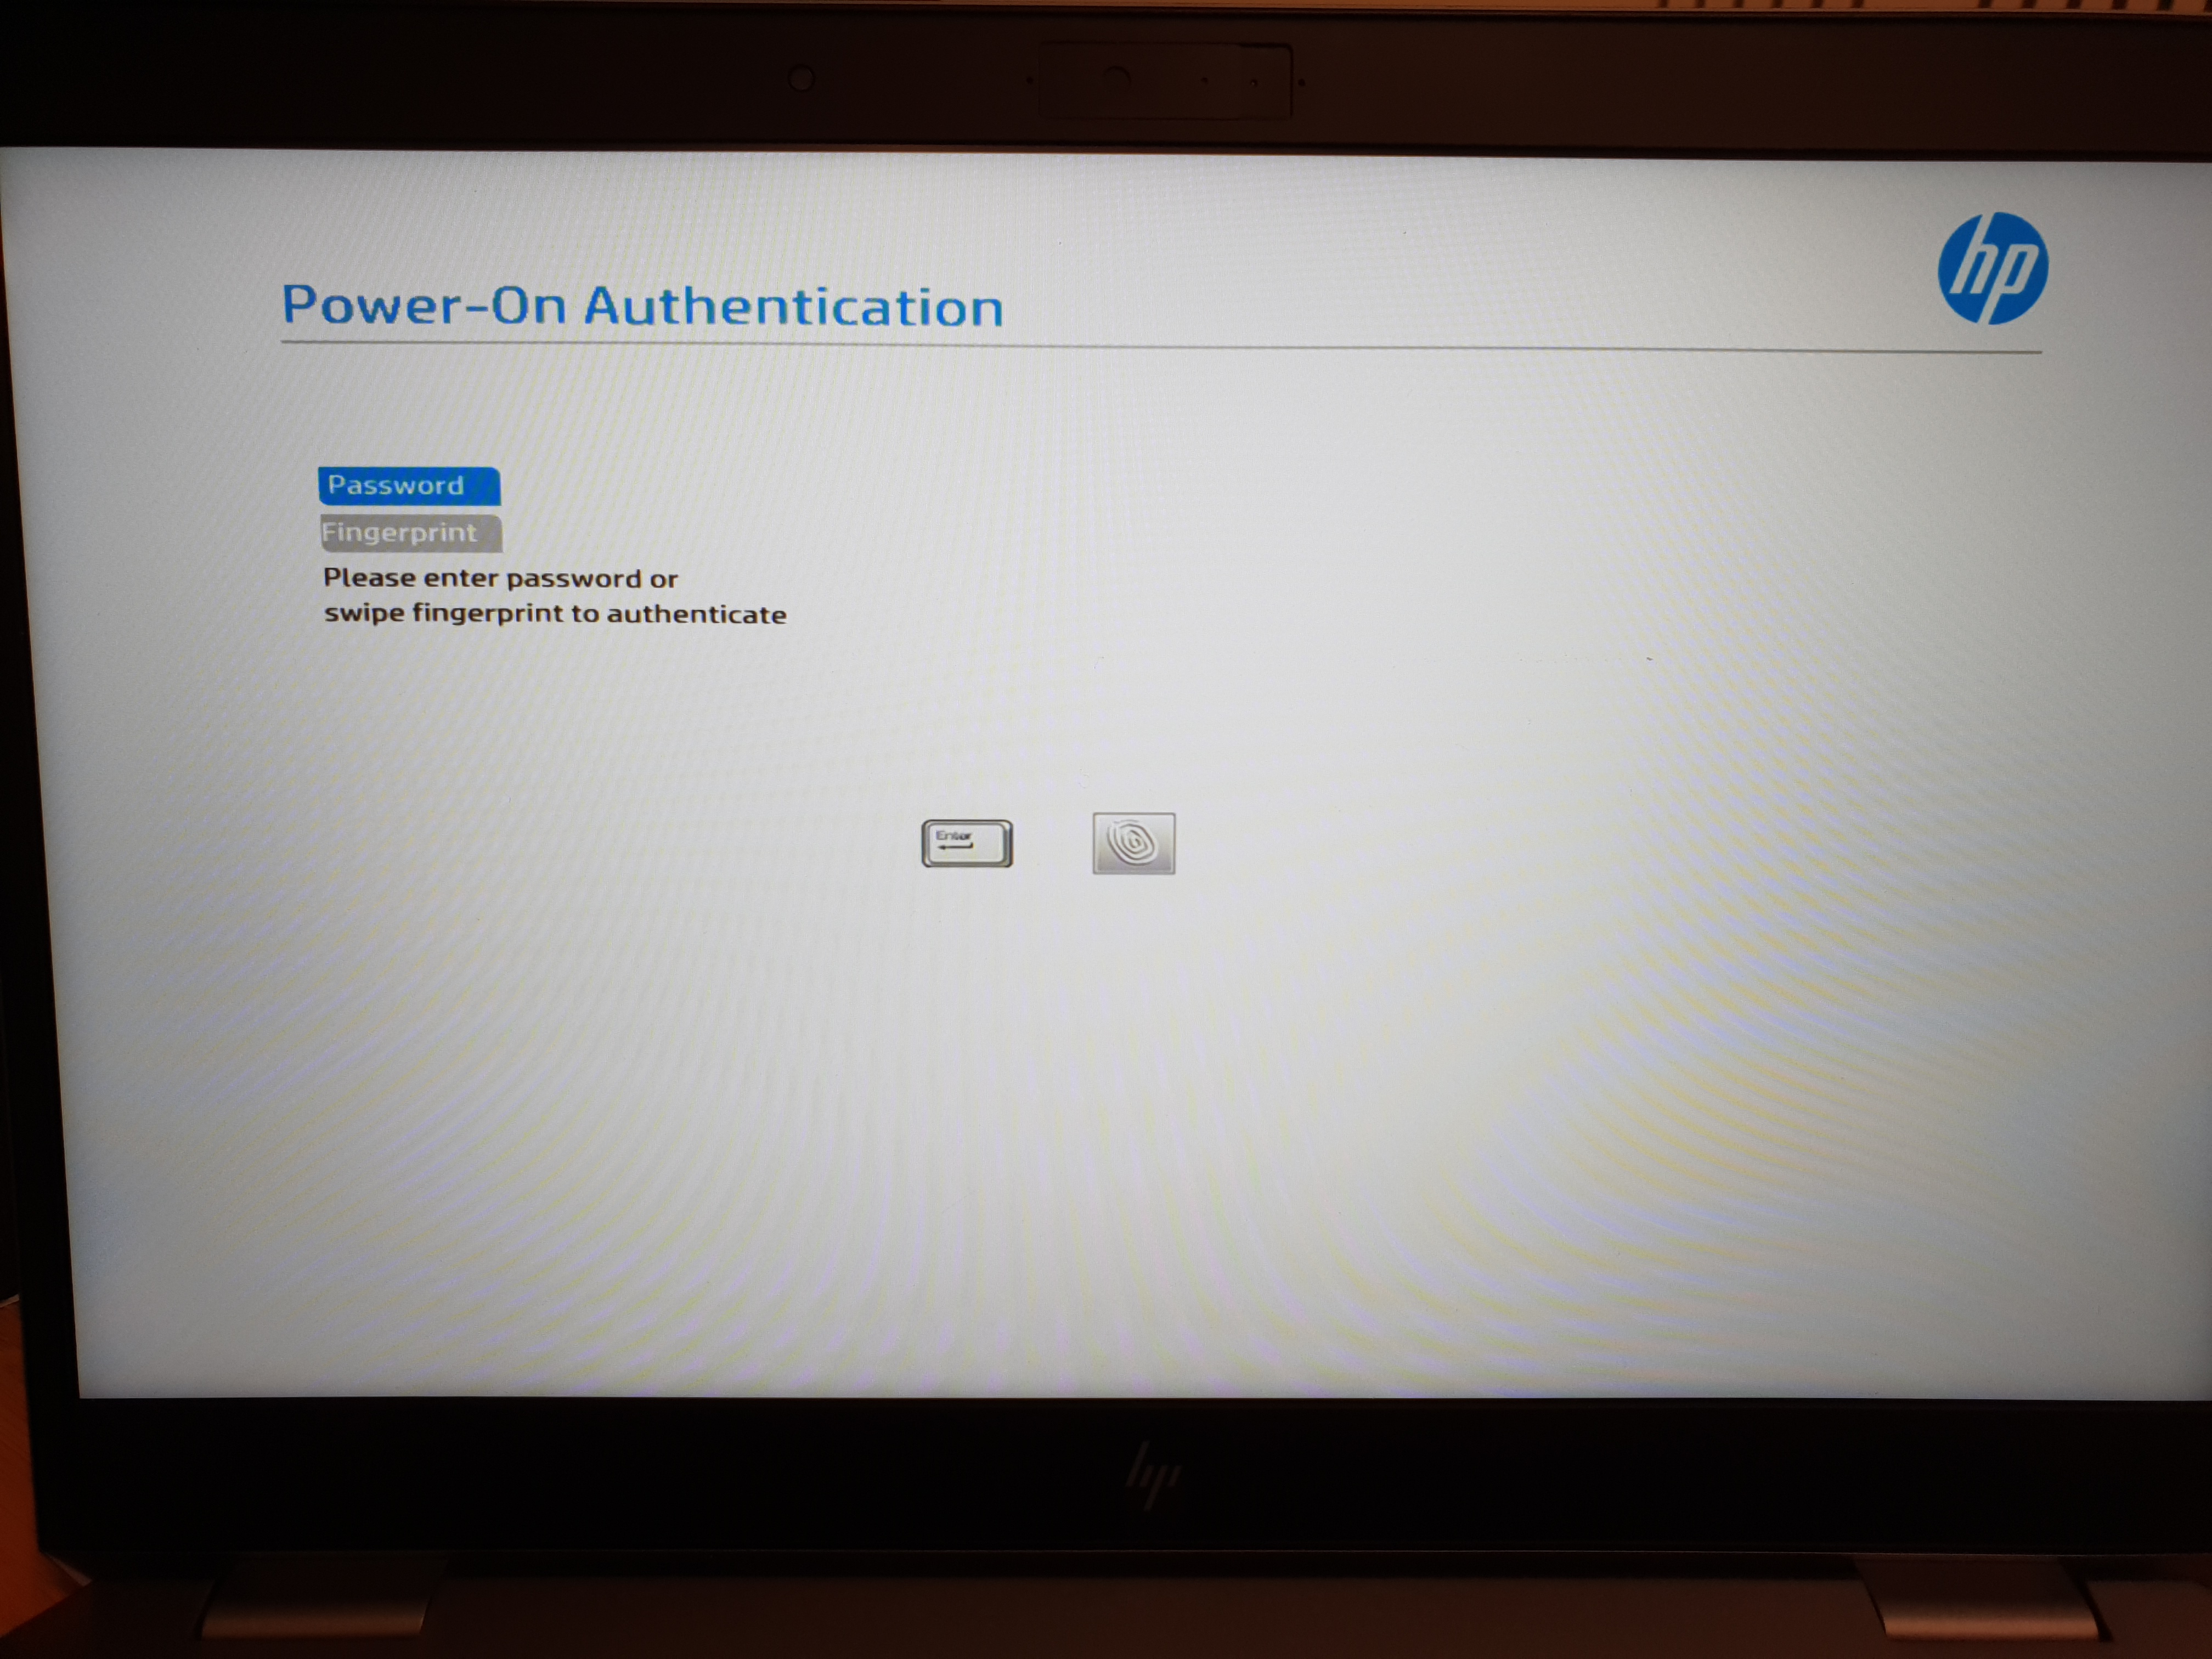 How To disable HP sure start power on authentication with ub